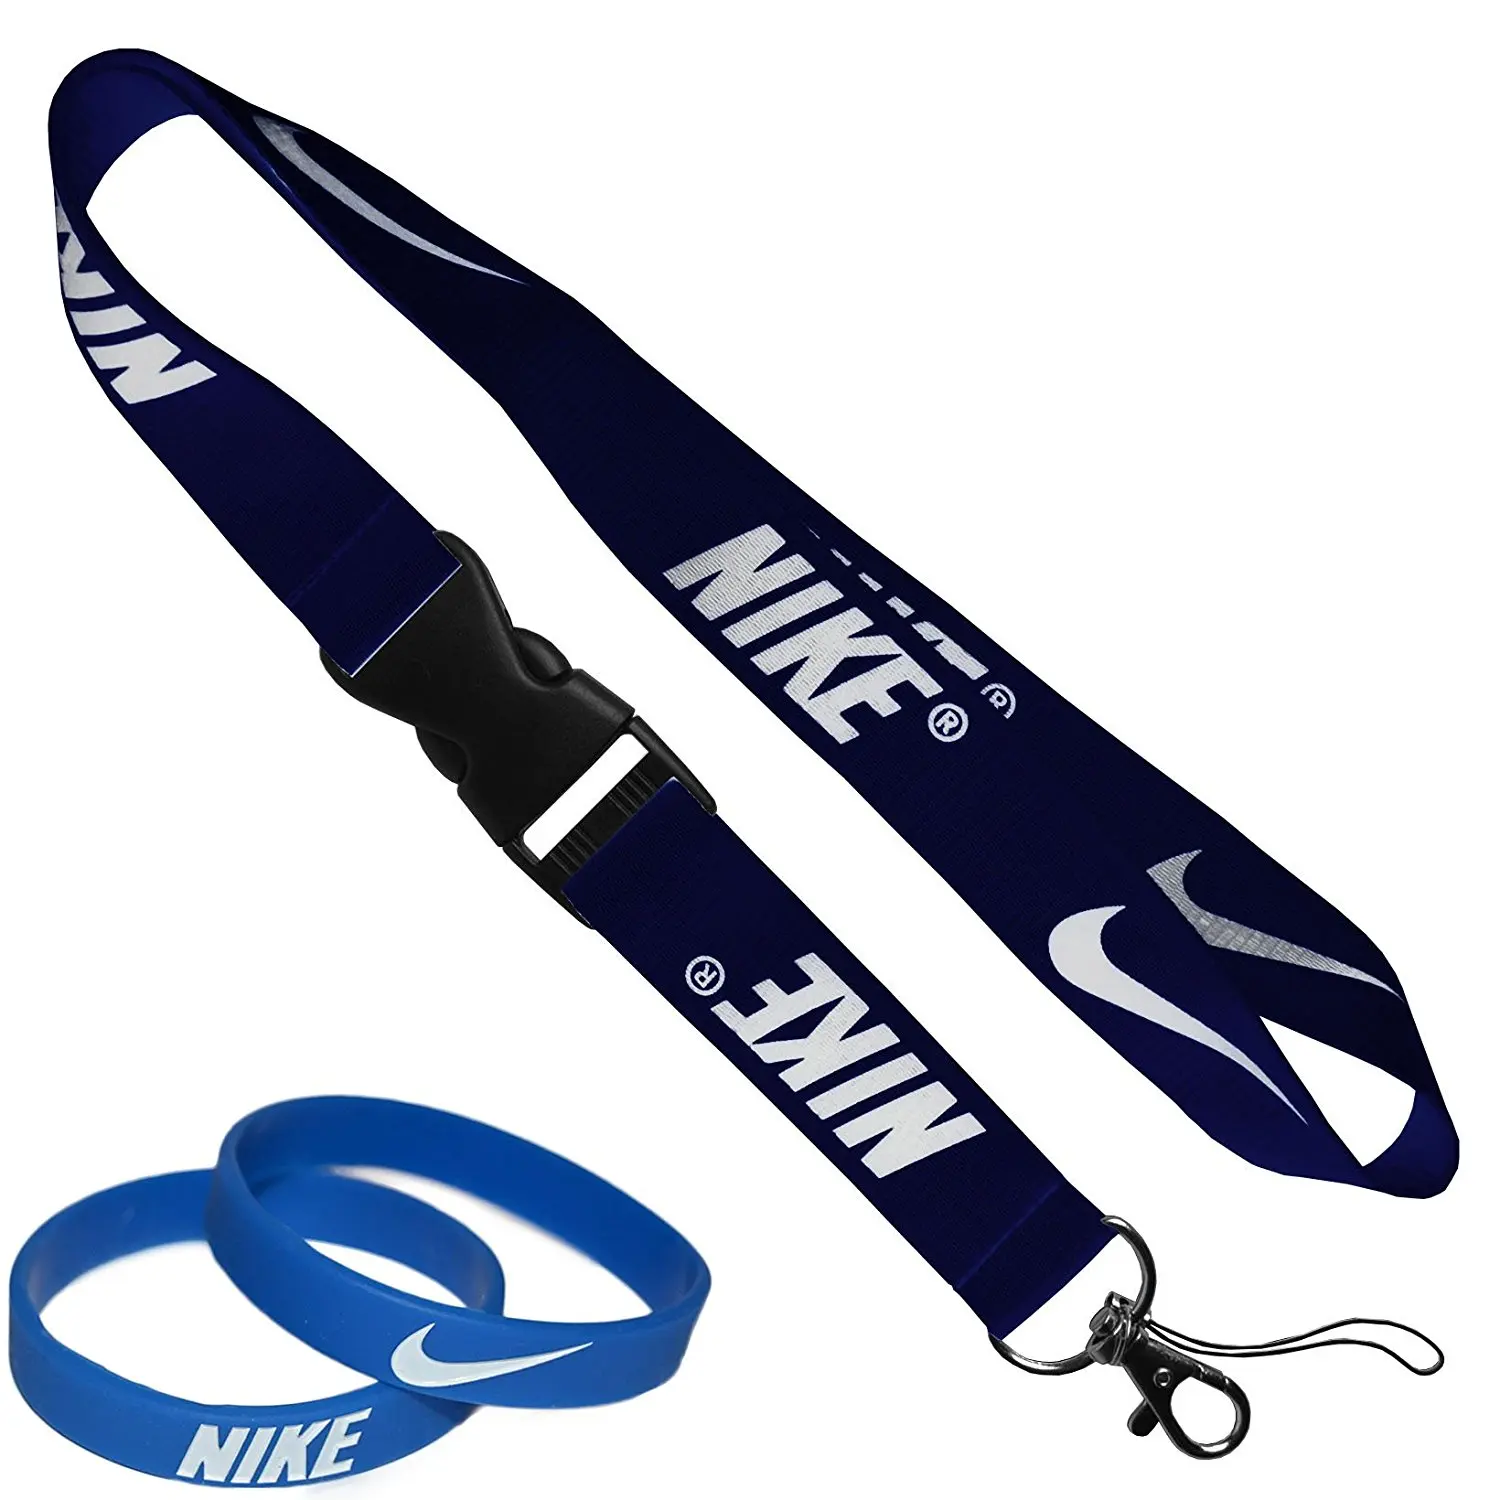 Cheap 3d Nike Keychain, find 3d Nike Keychain deals on line at Alibaba.com